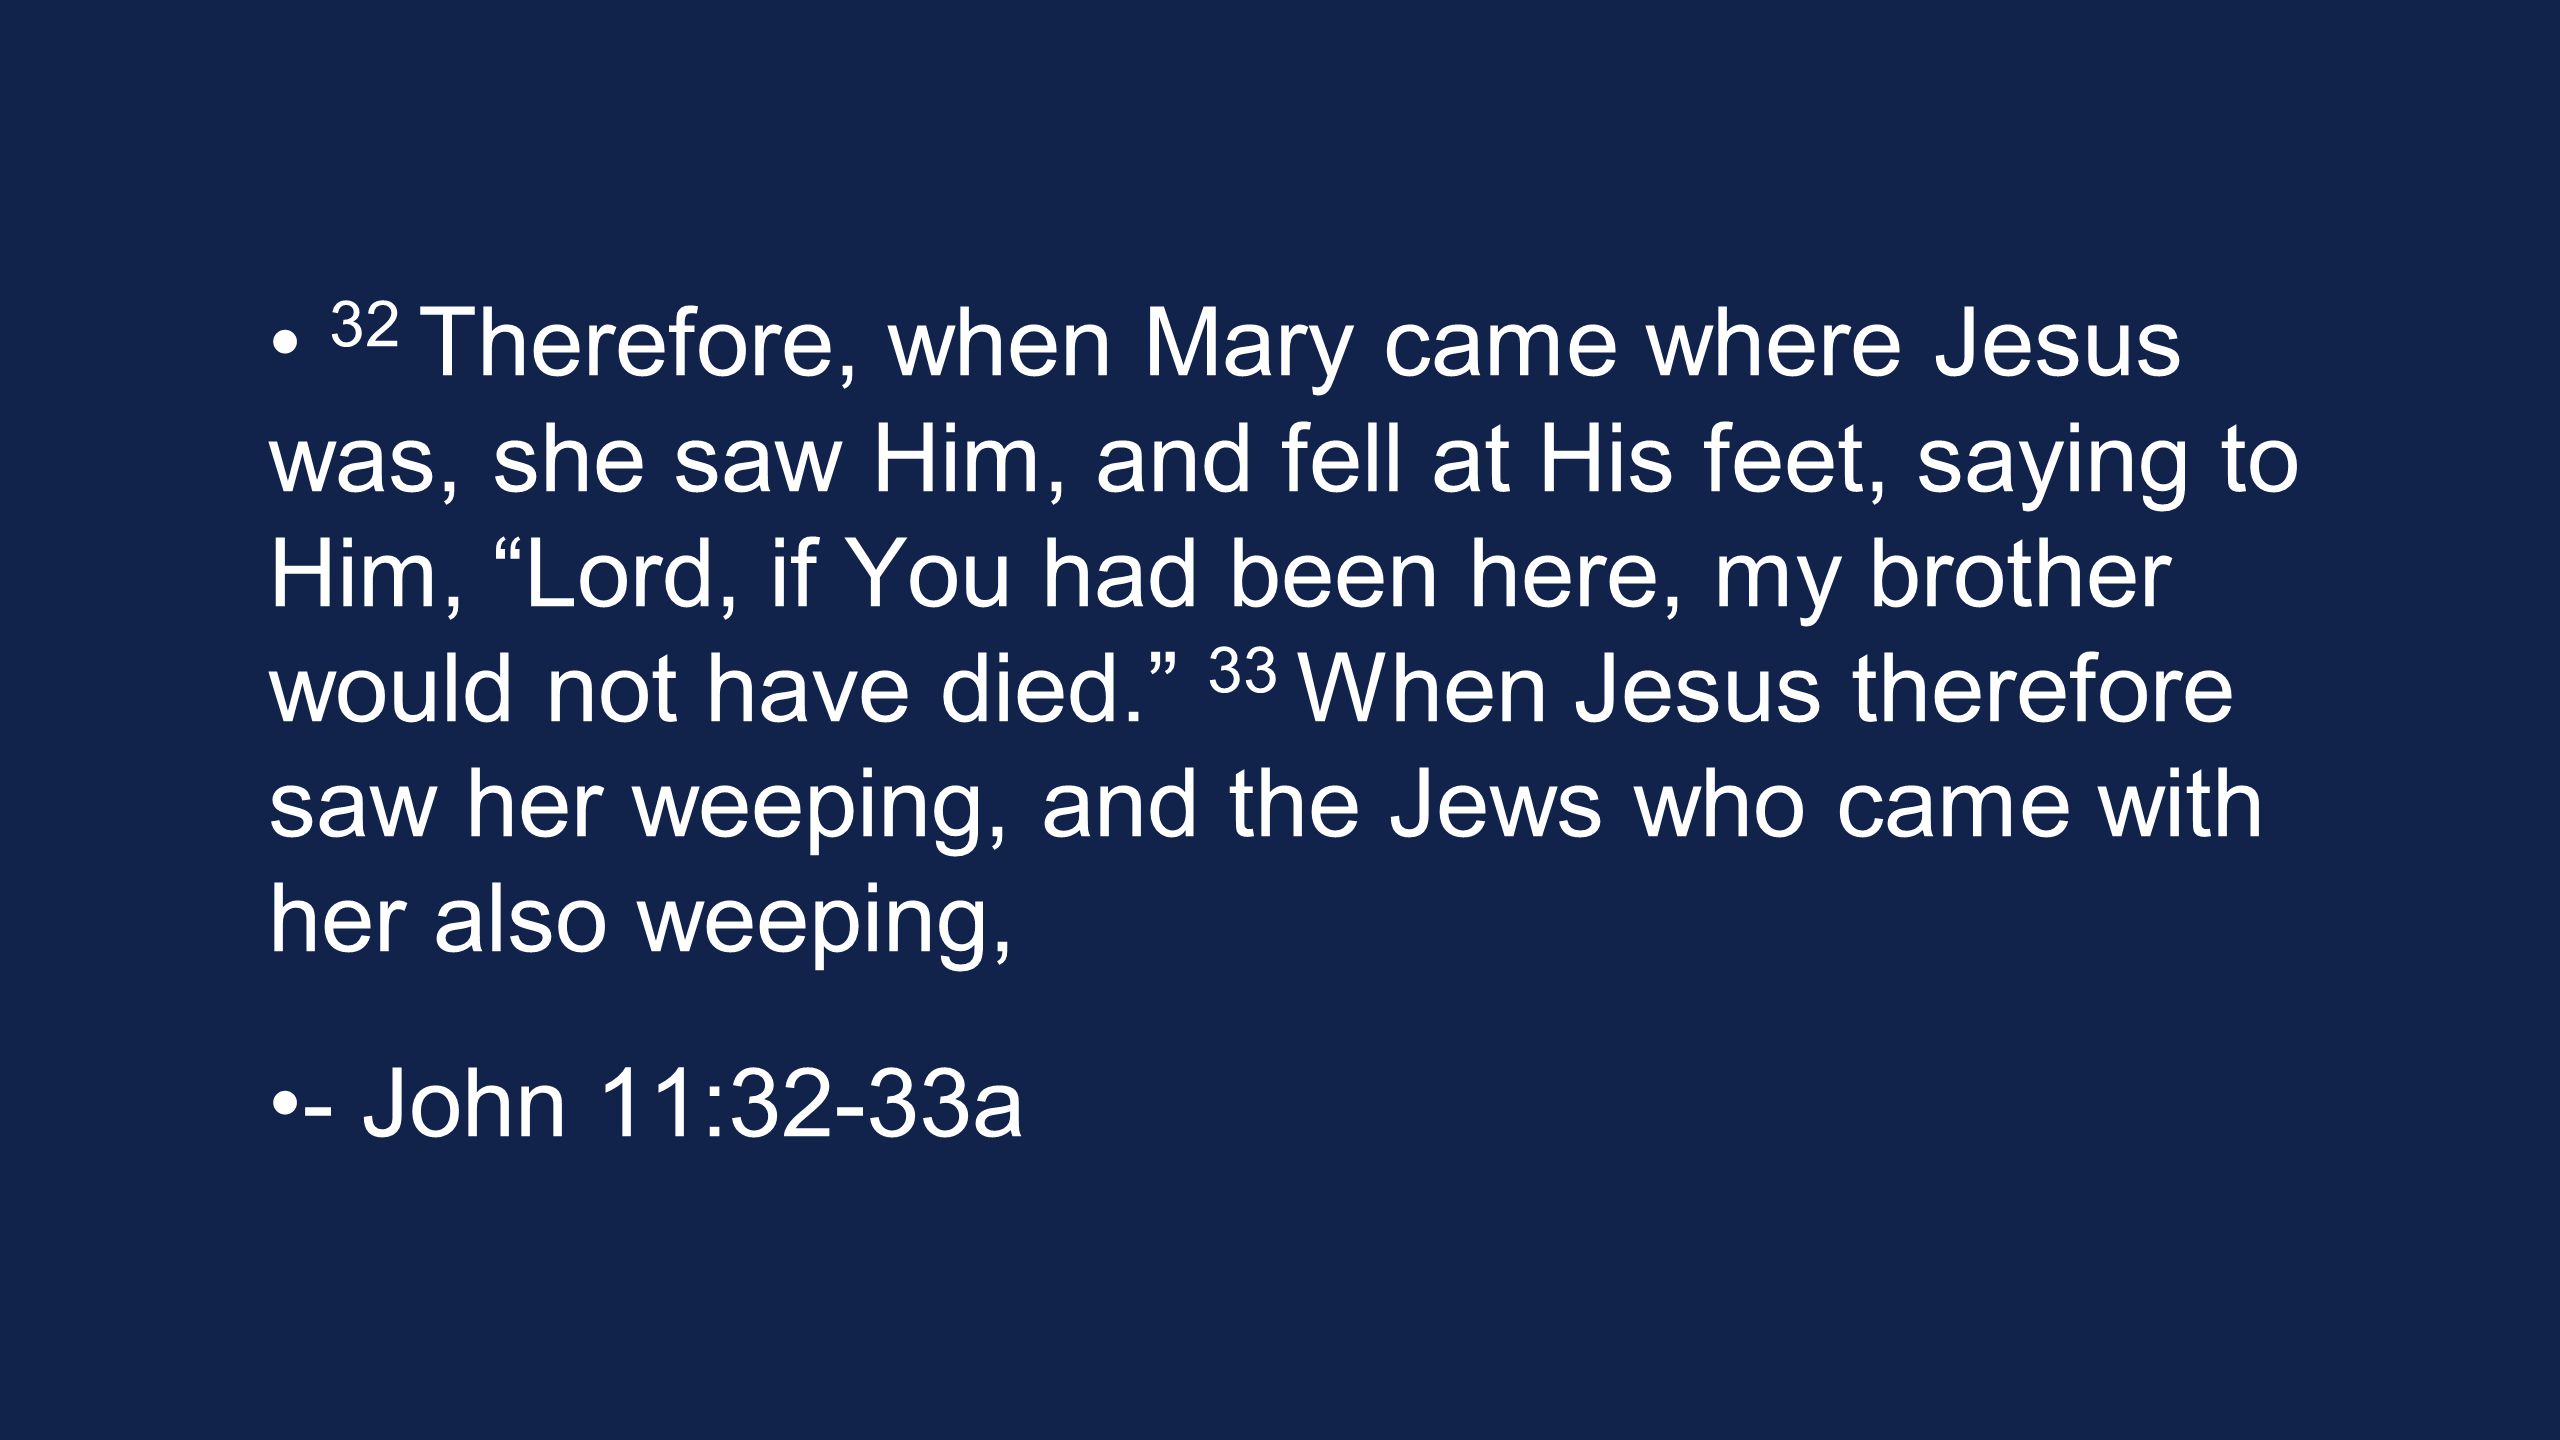 32 Therefore, when Mary came where Jesus was, she saw Him, and fell at His feet, saying to Him, Lord, if You had been here, my brother would not have died. 33 When Jesus therefore saw her weeping, and the Jews who came with her also weeping, - John 11:32-33a